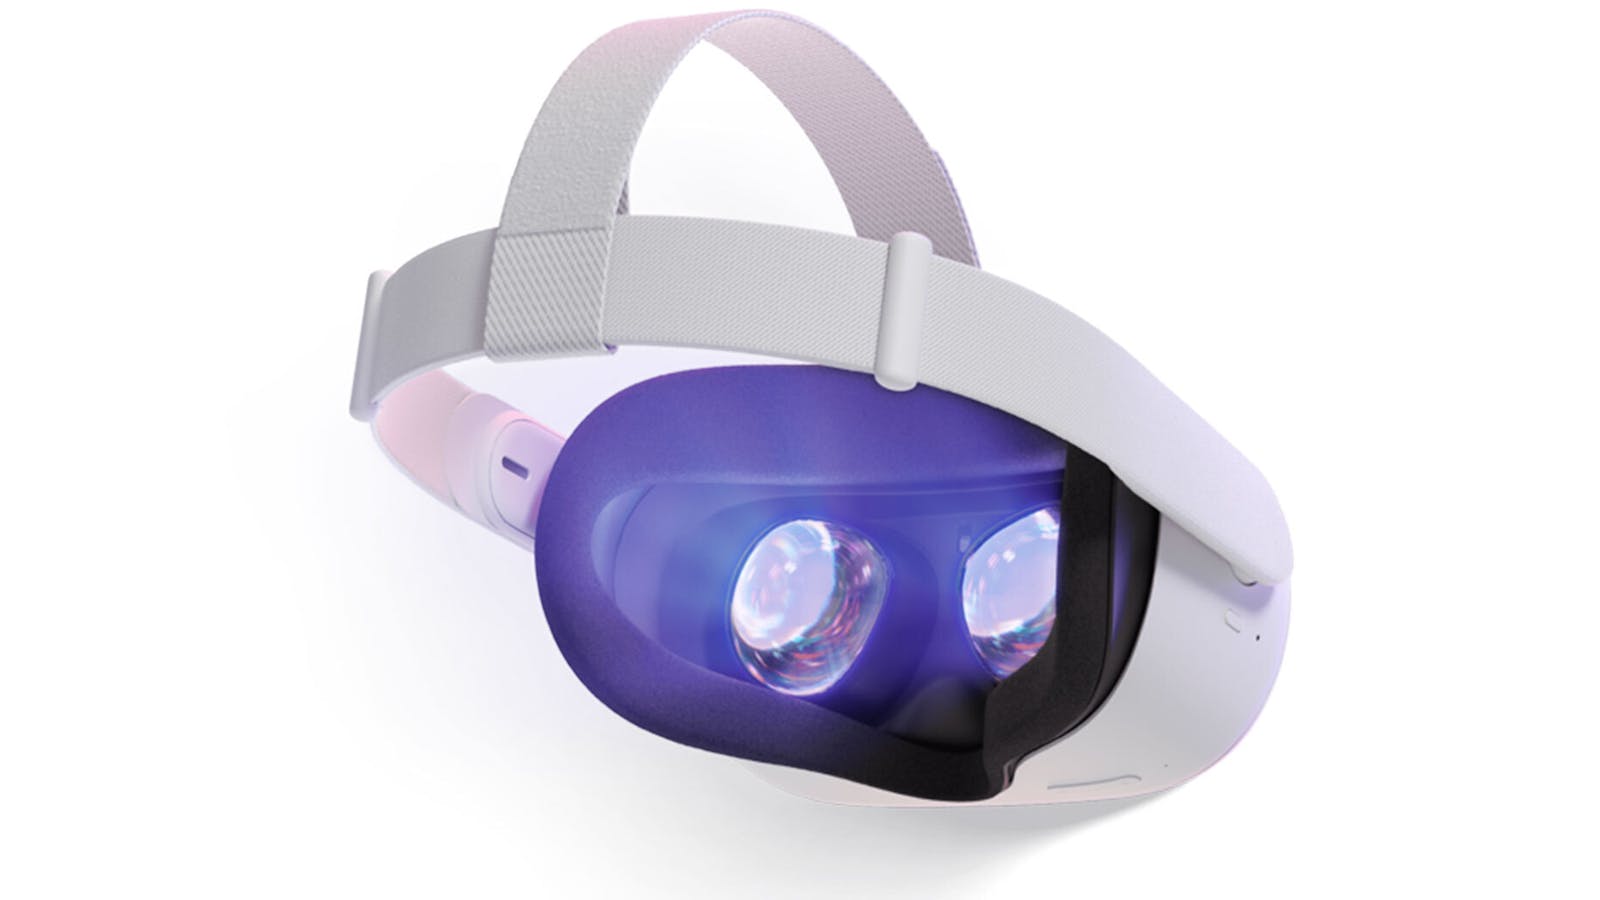 Facebook's Oculus Quest 2. Facebook on Tuesday suspended sales of the headset temporarily. Image courtesy Facebook/Oculus